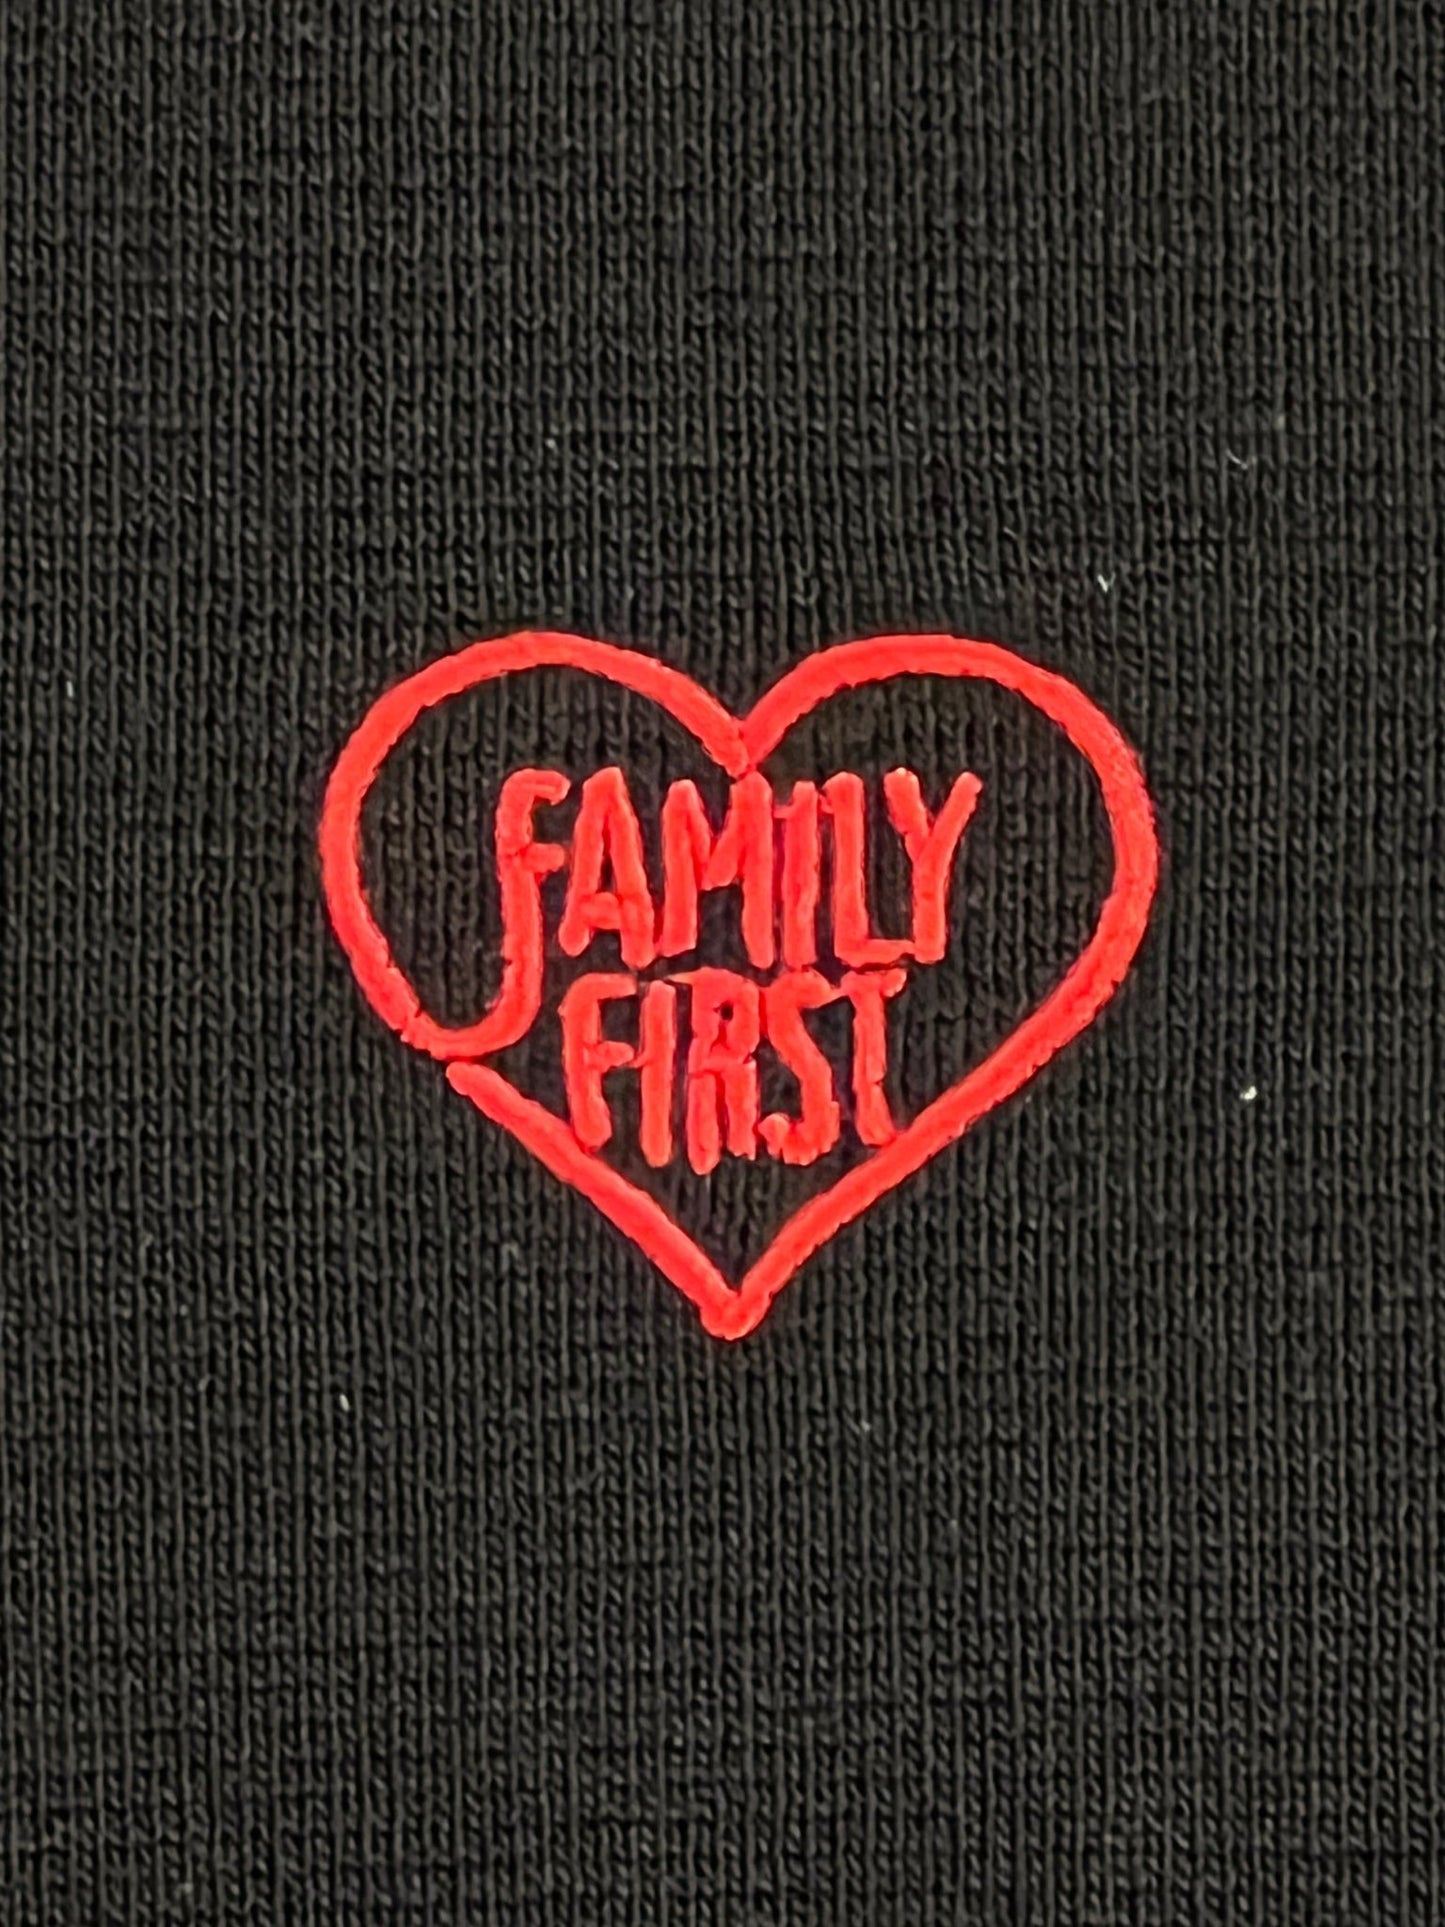 A black hoodie with an embroidered heart logo on it that says FAMILY FIRST – FAMILY FIRST SWS2401 HOODIE SWEATER BK.